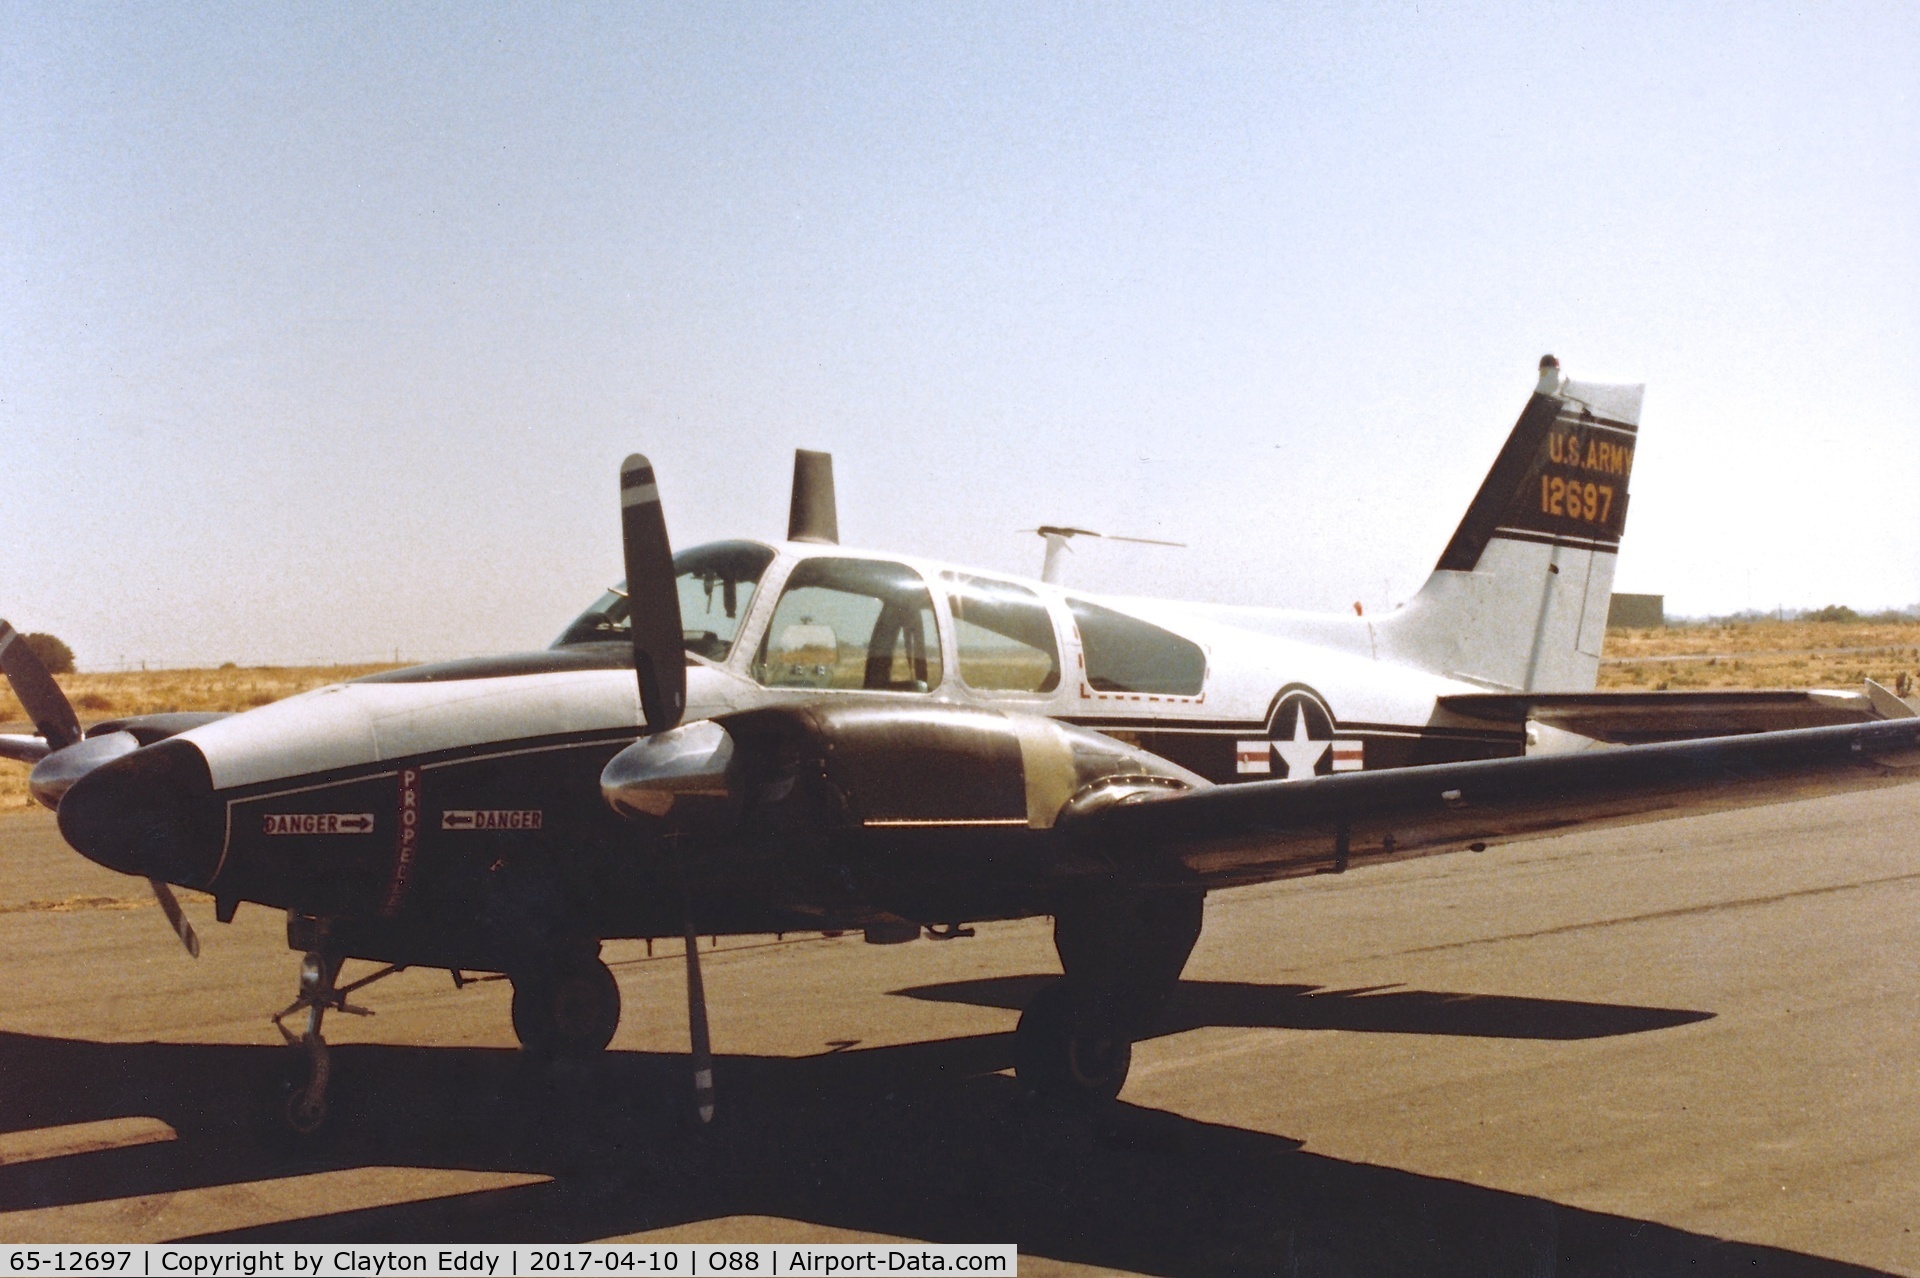 65-12697, 1965 Beech T-42A Cochise C/N TF-19, Old Rio Vista Airport in California. Late 1970's